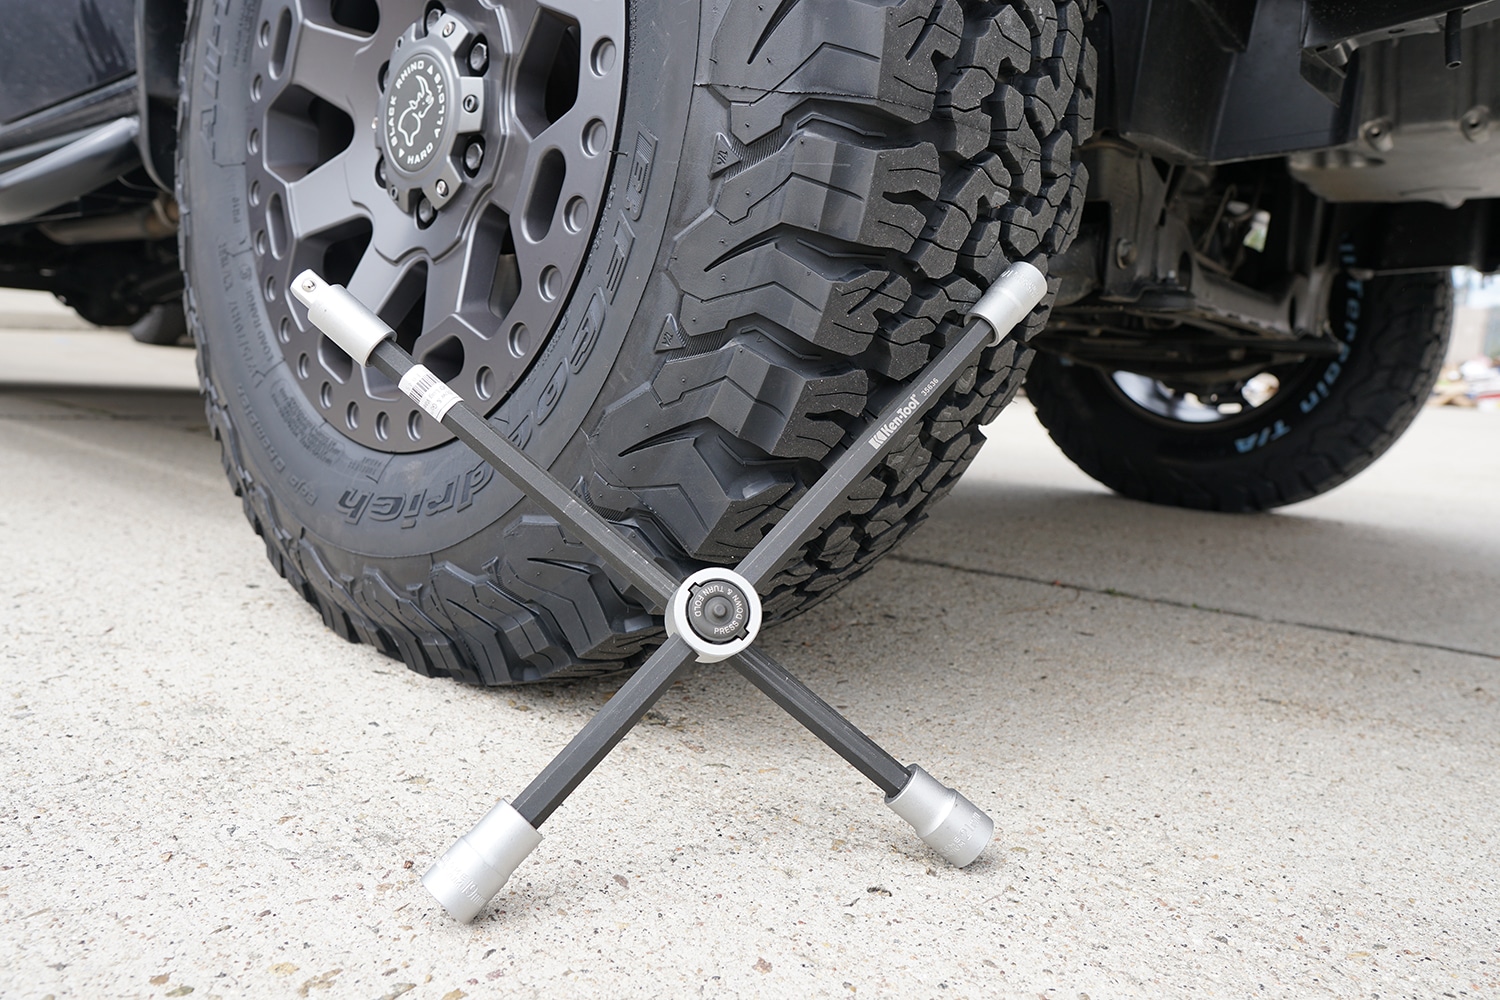 Ken-Tool 4-Way Chrome Wrench for Car